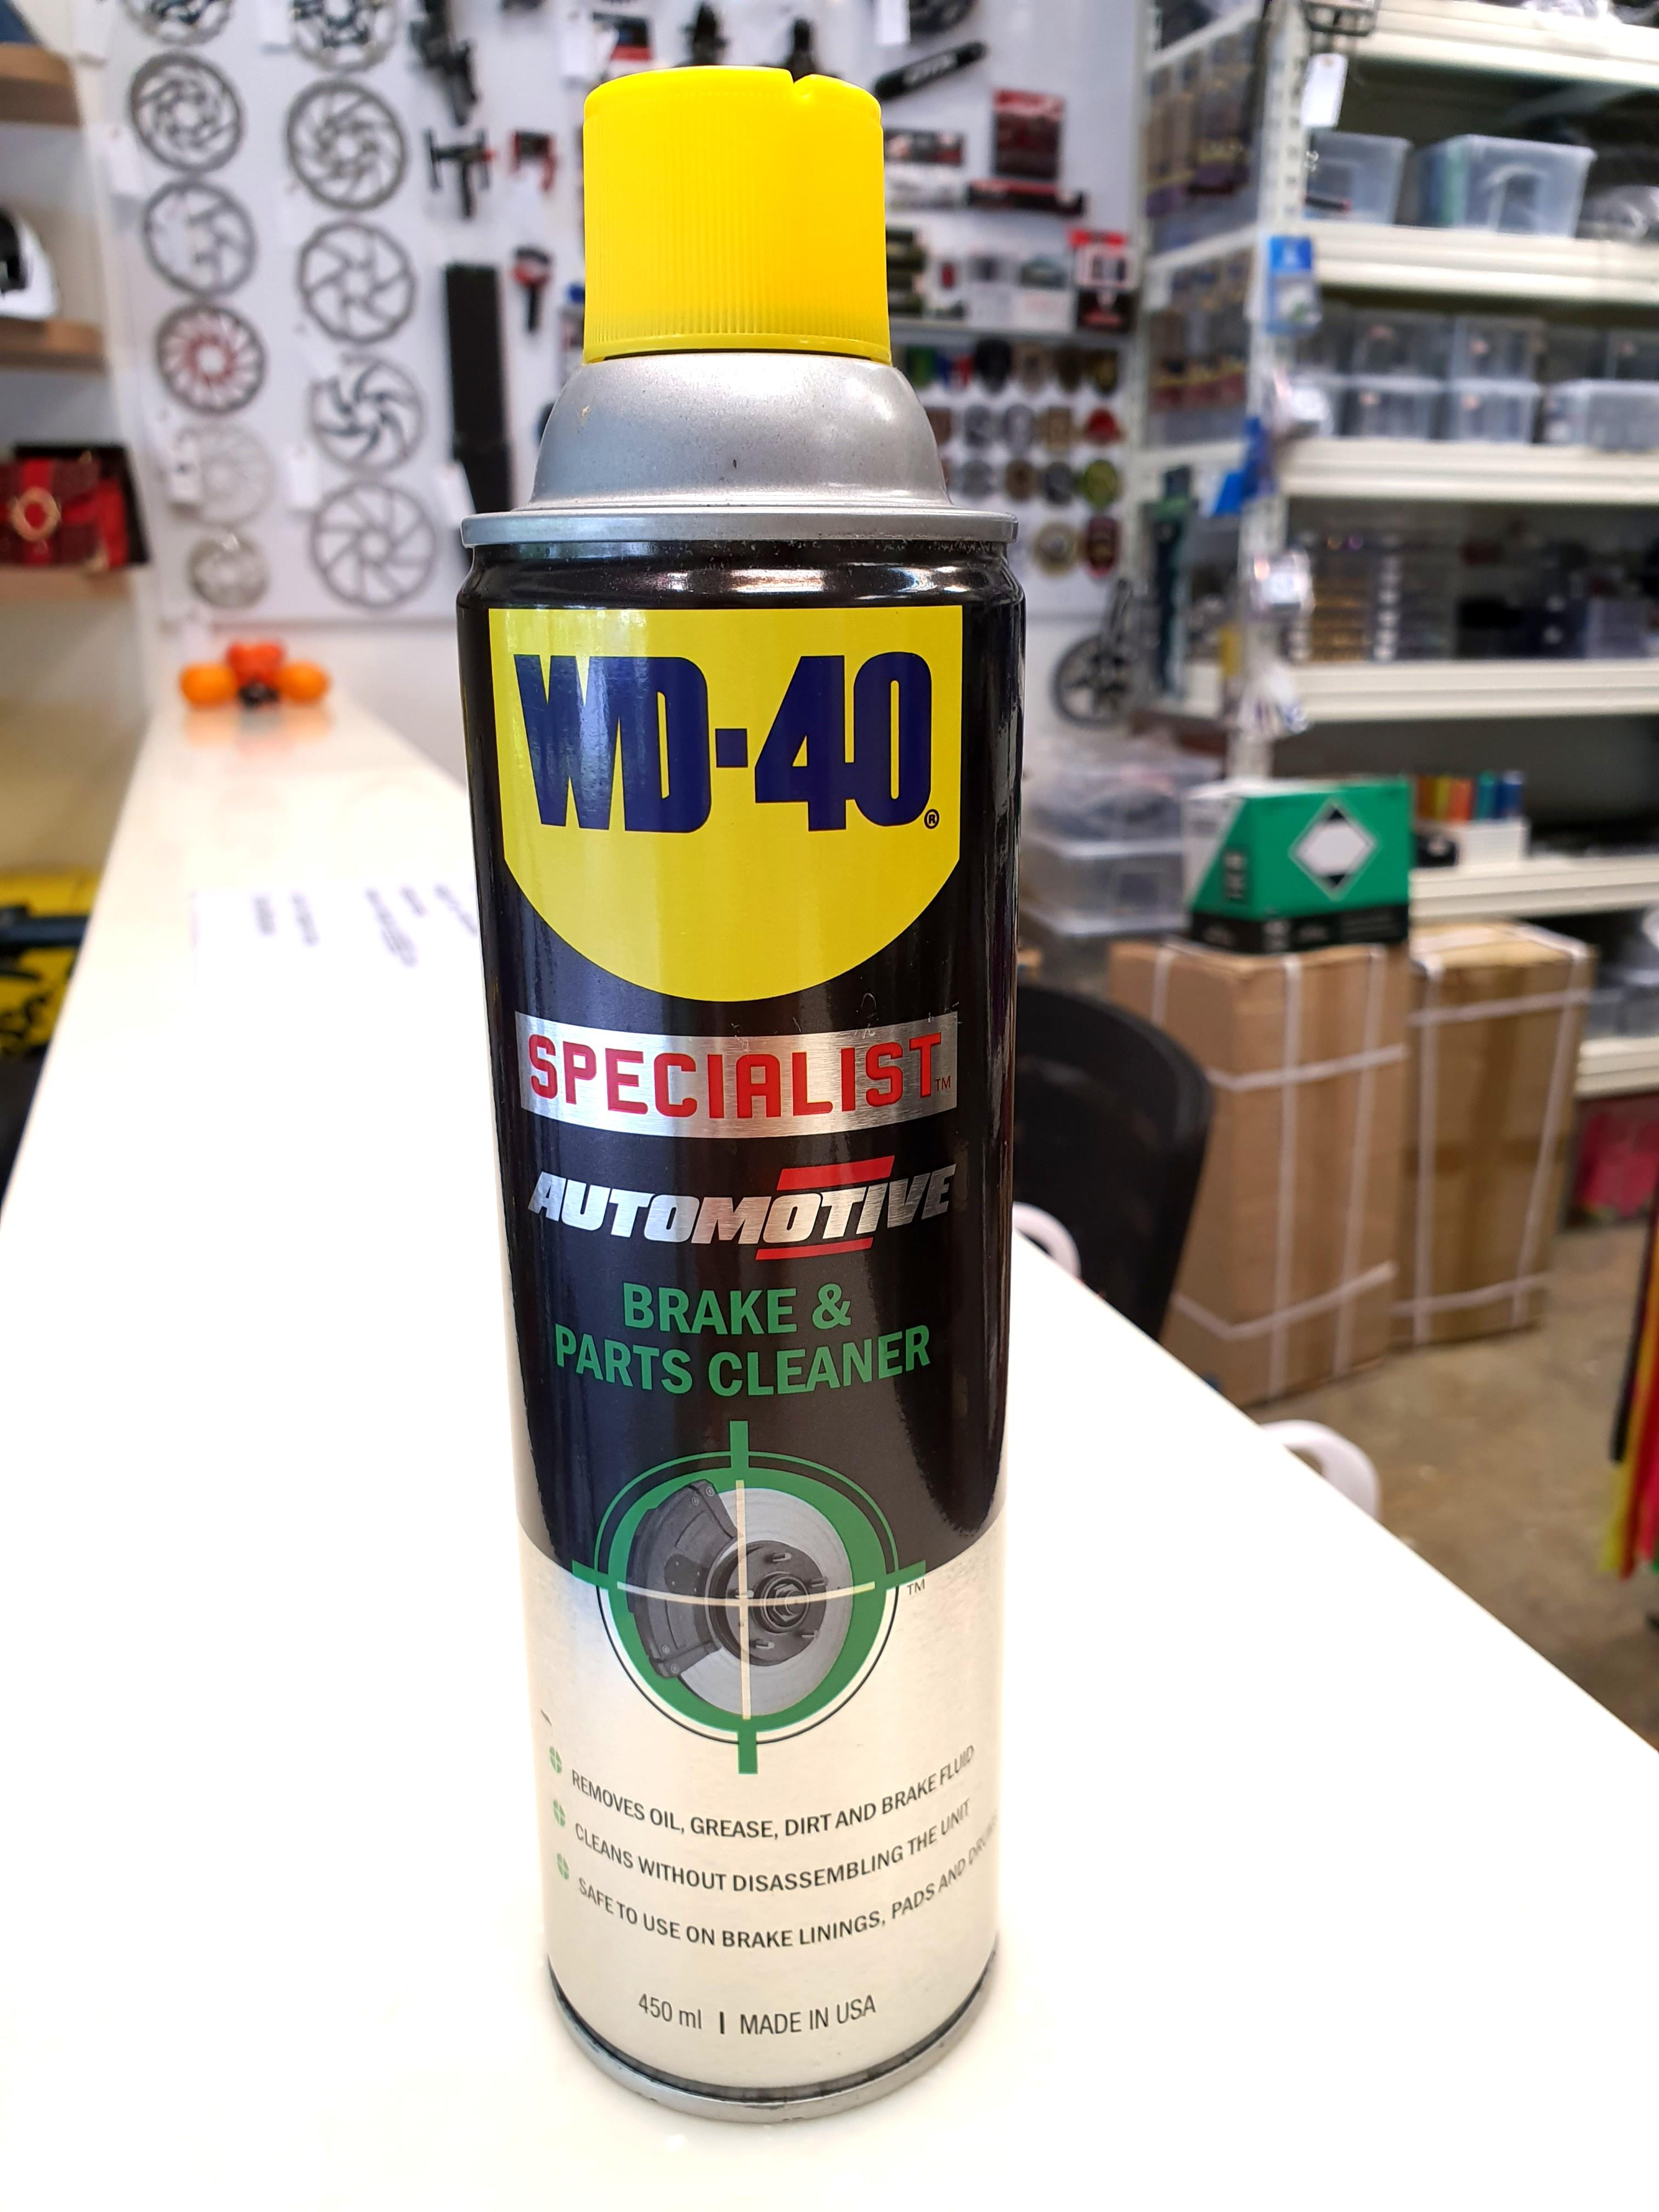 Anyone use this degreaser? : r/bikewrench